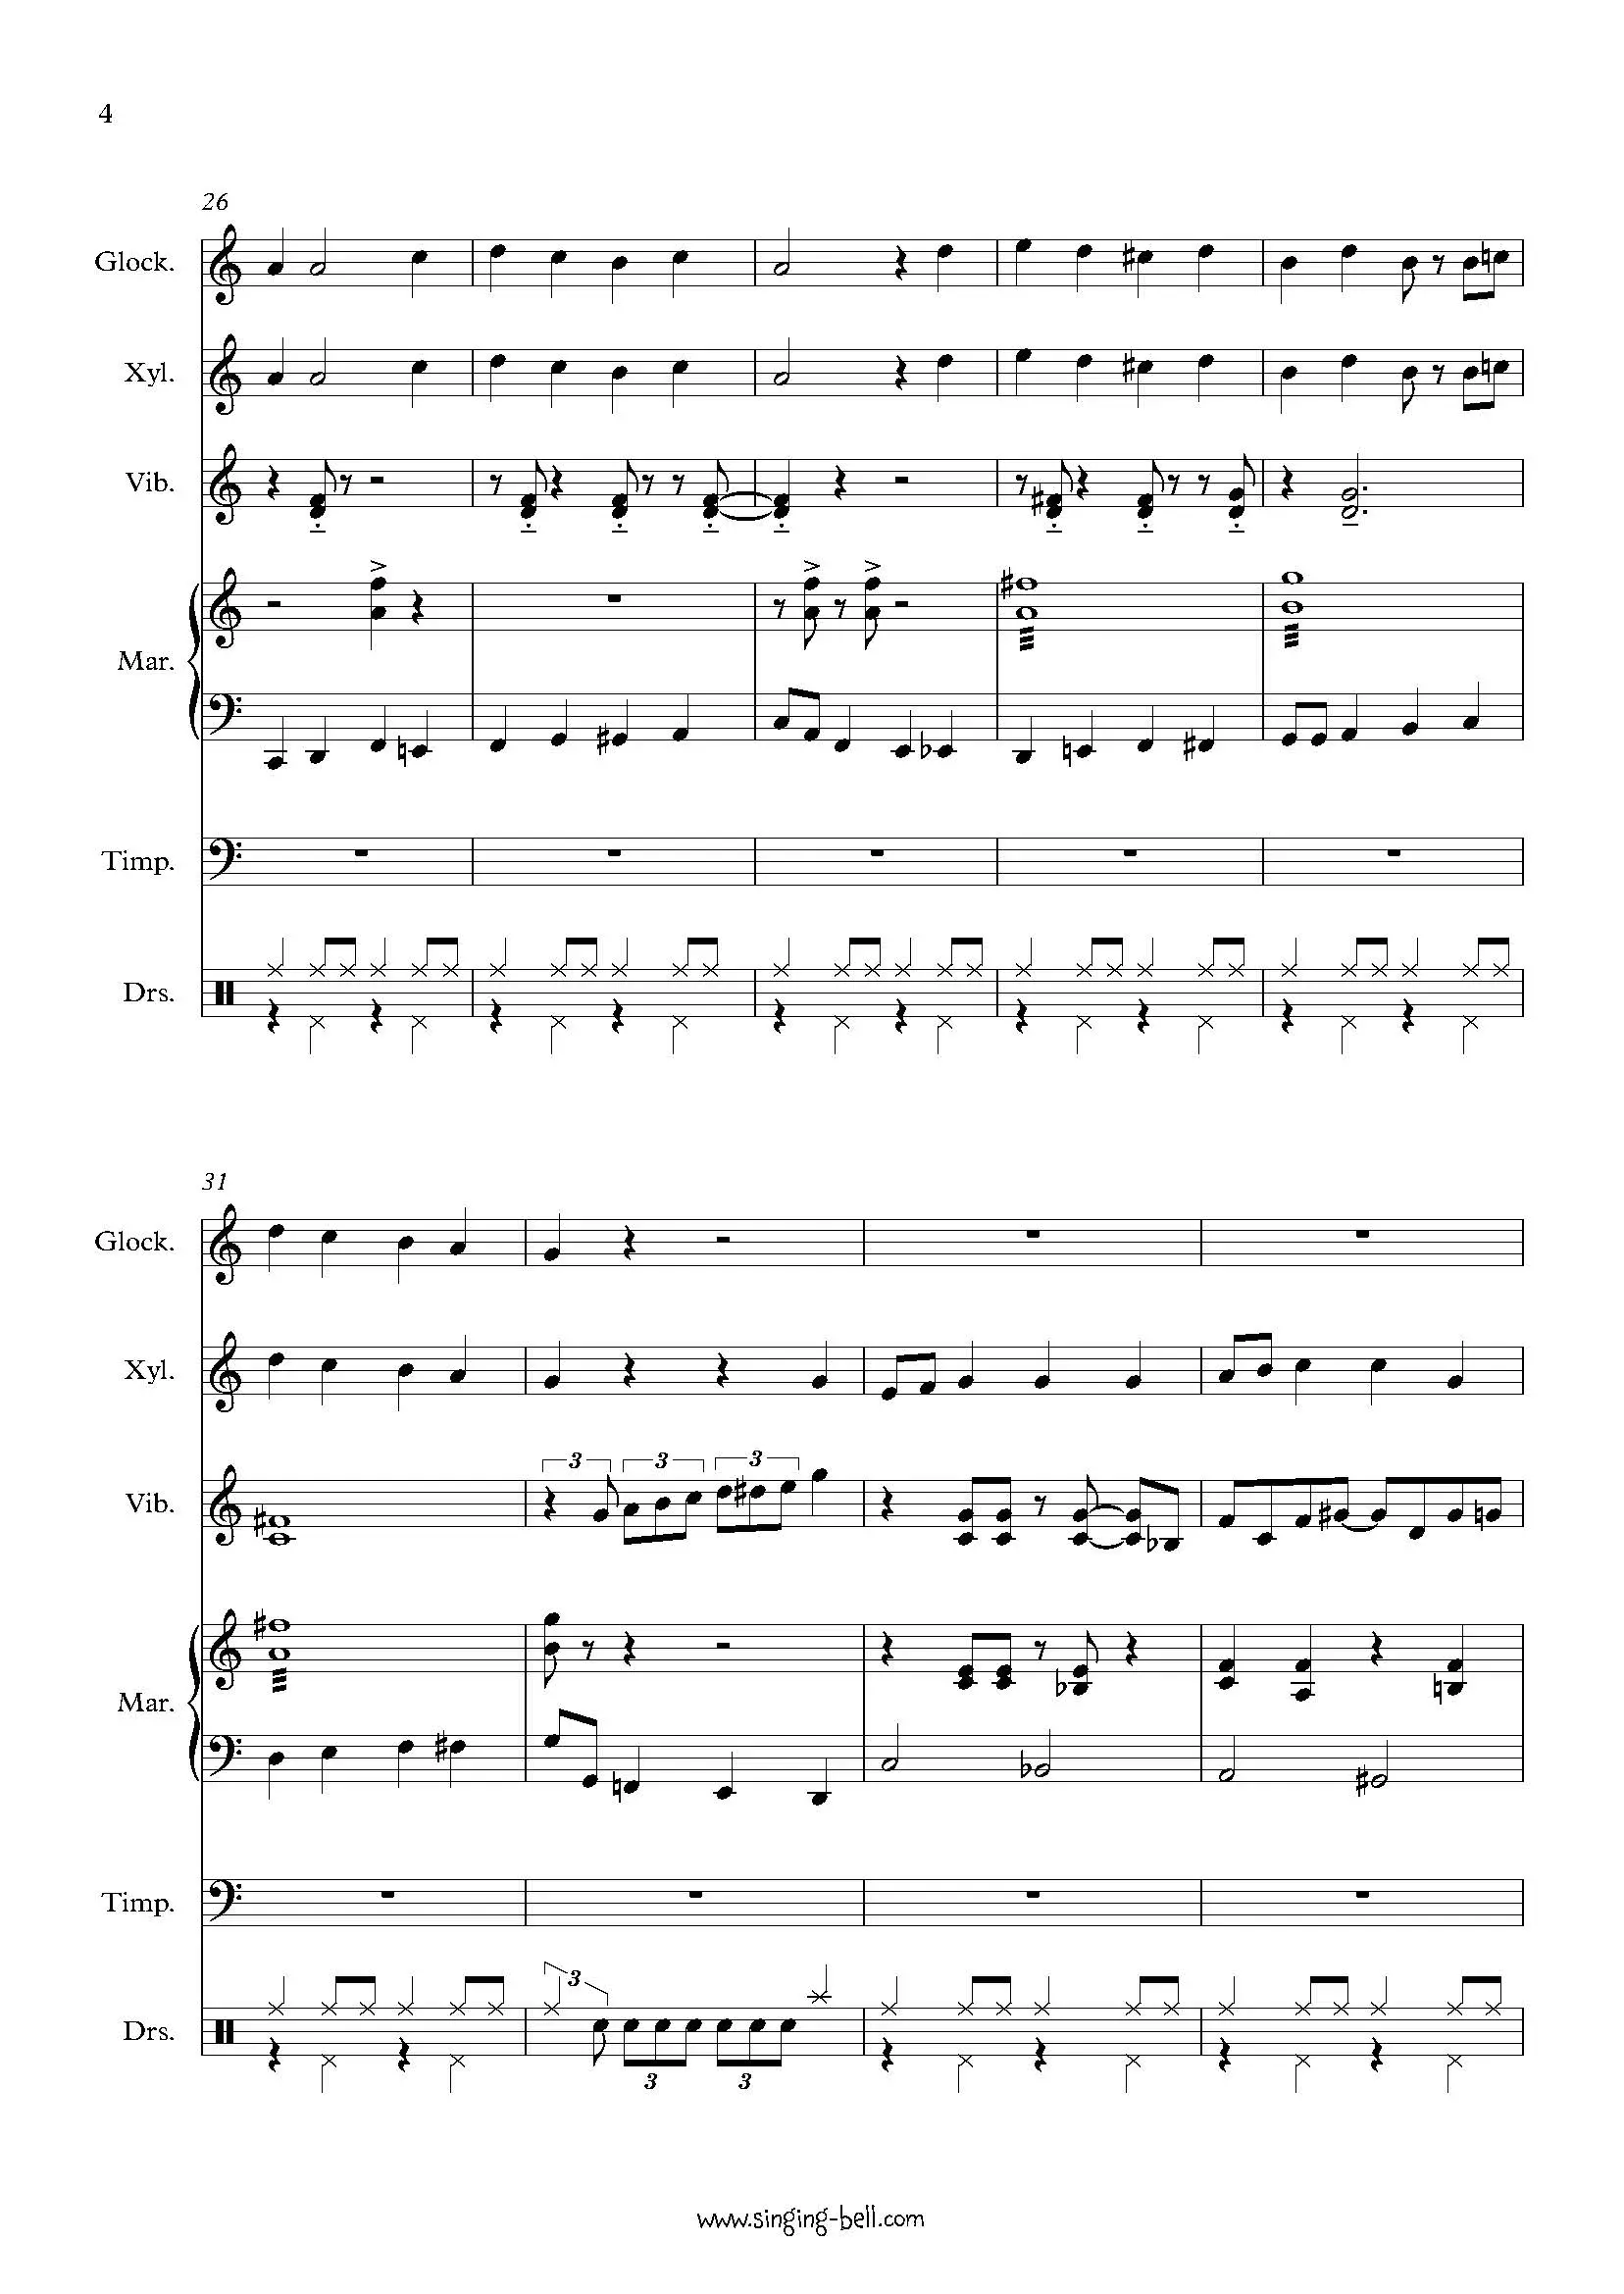 Santa Claus is Coming to Town - Percussion Sheet Music Page 4